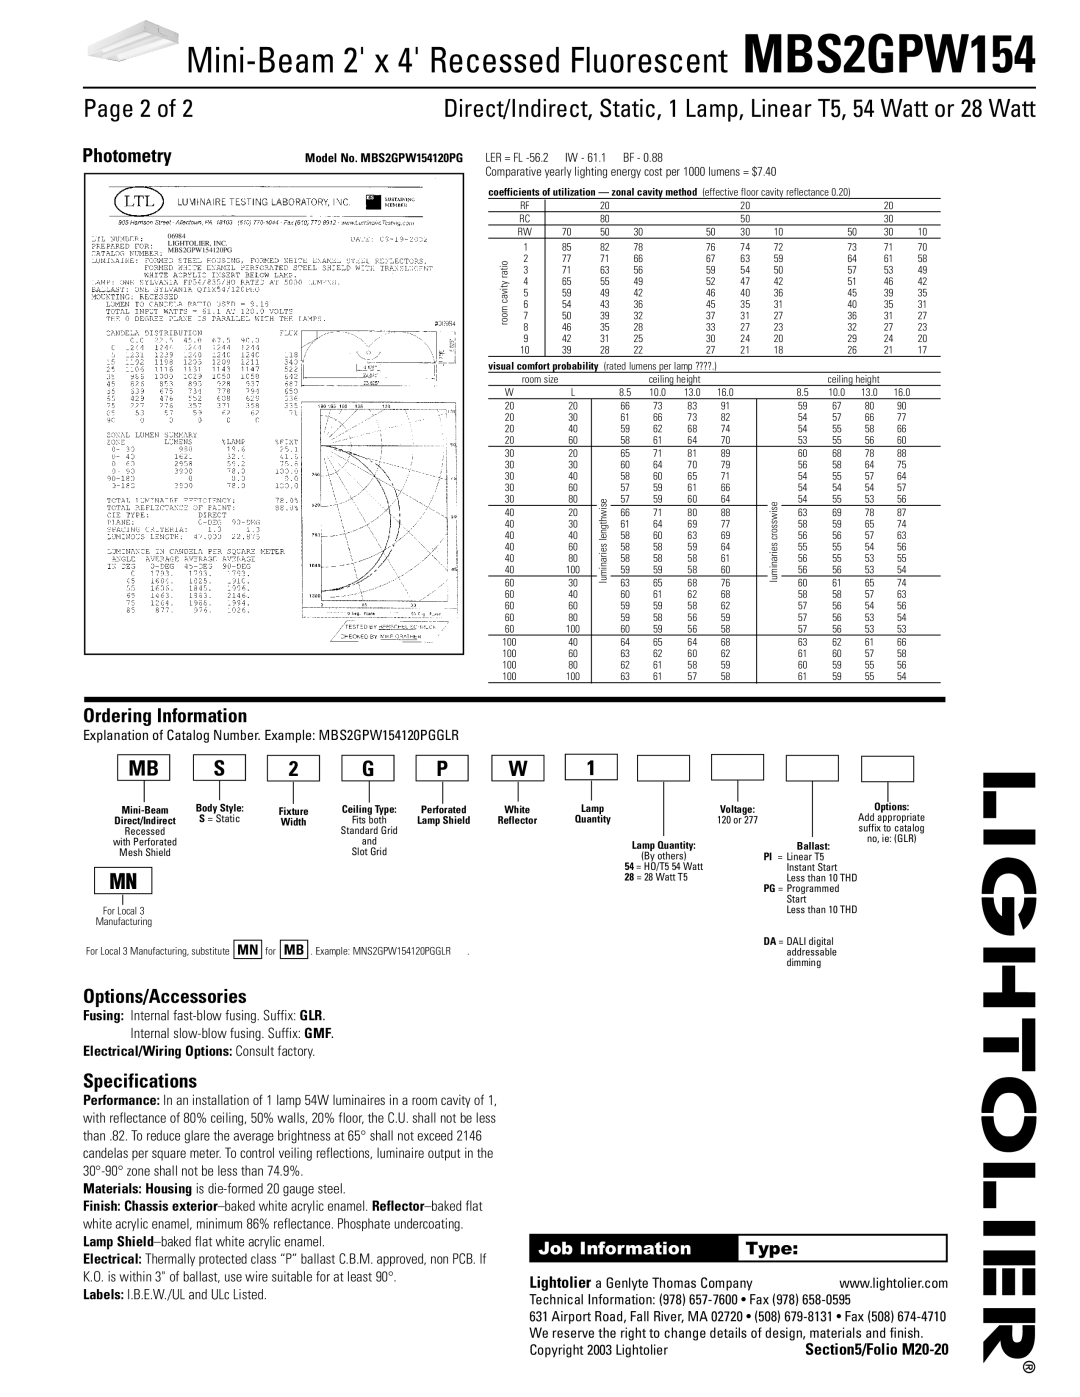 Lightolier MBS2GPW154 Page 2 of, Photometry, Ordering Information, Options/Accessories, Specifications, Job Information 